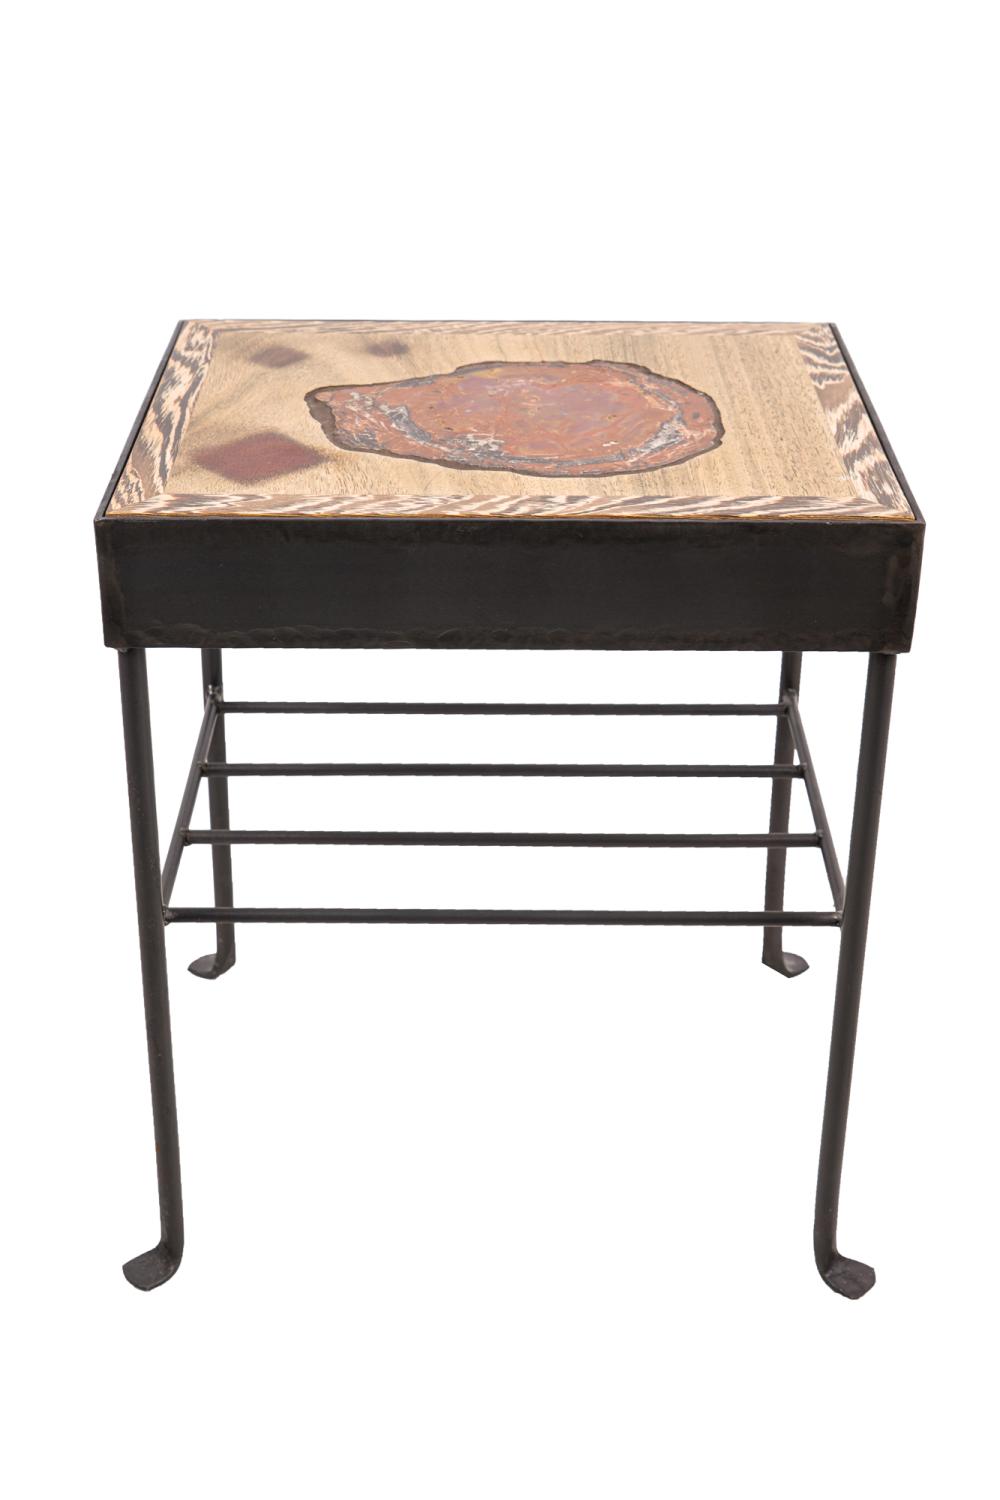 CHAJO SIDETABLE WITH FOSSIL TOPthe